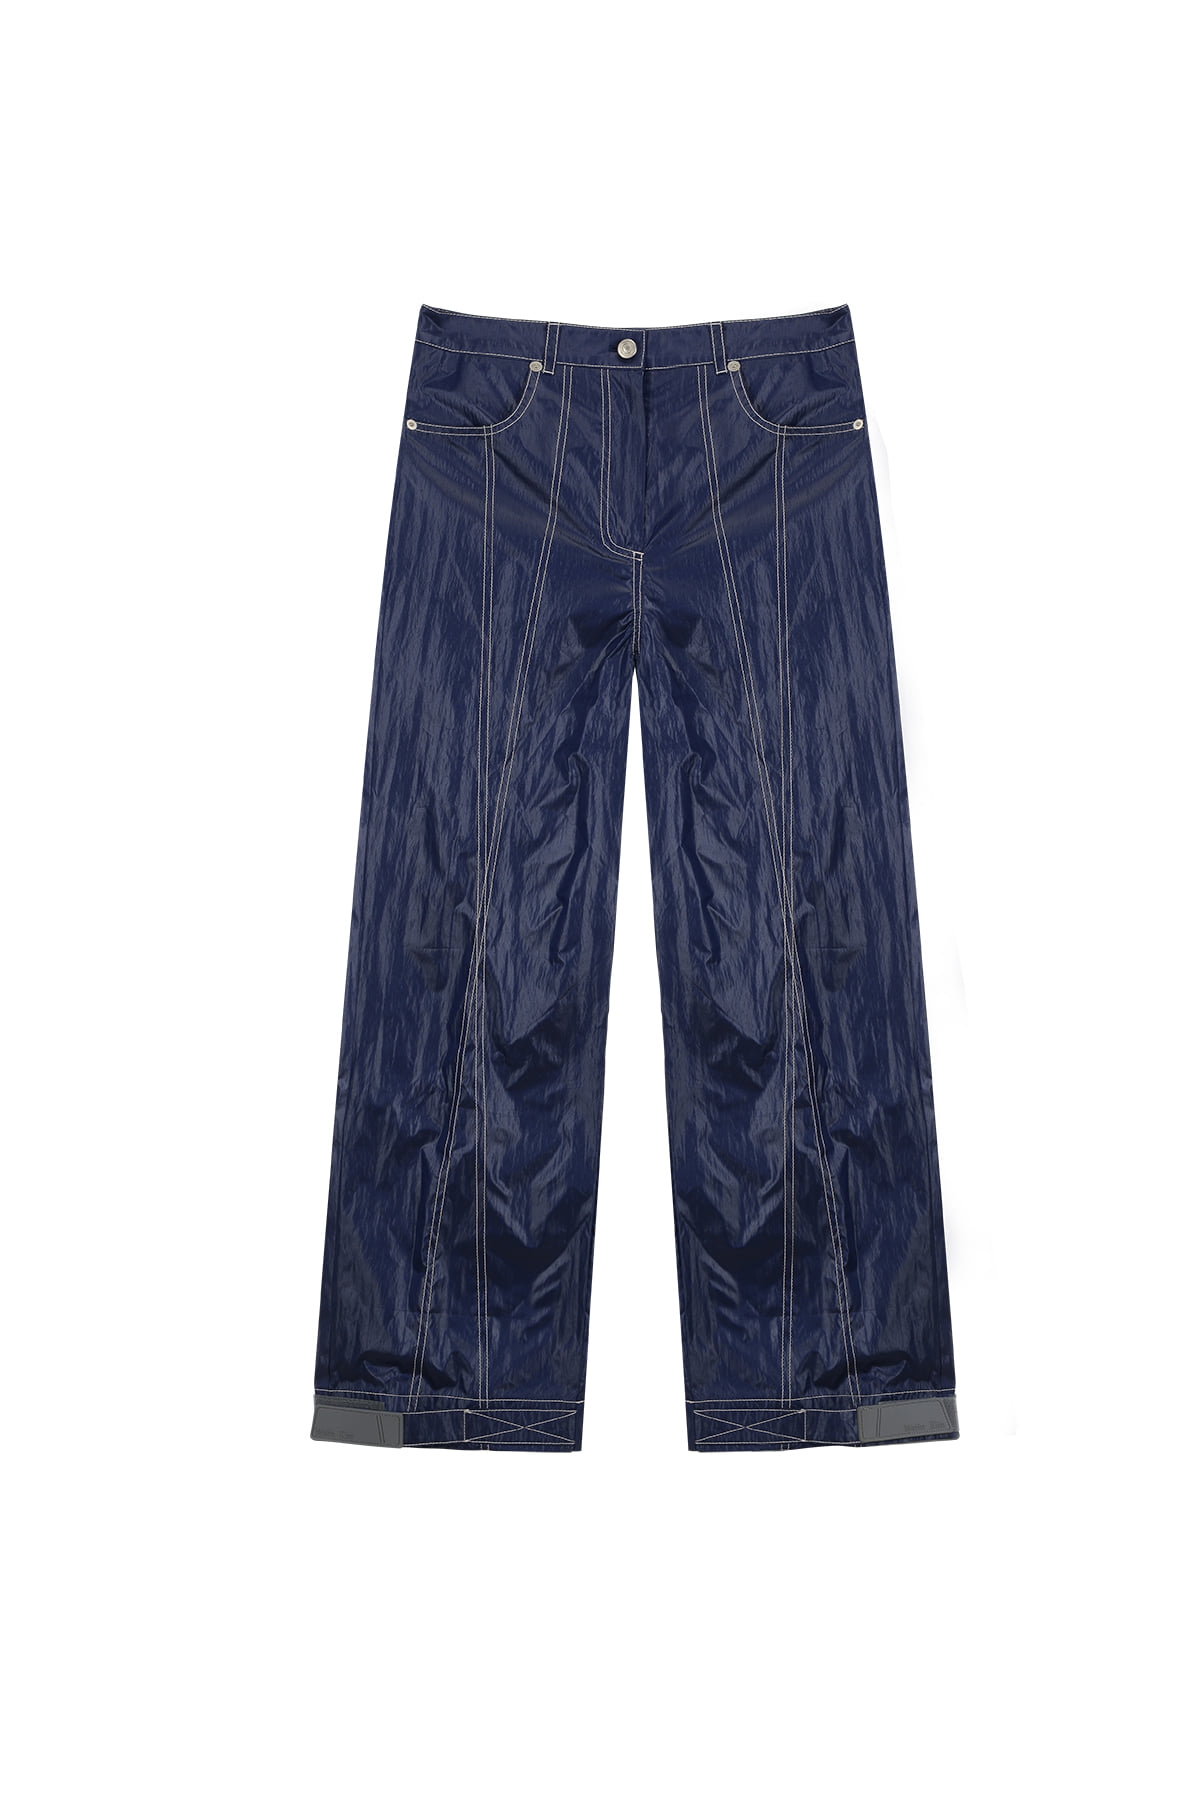 STITCH DETAILED TRUCKER PANTS IN BLUE